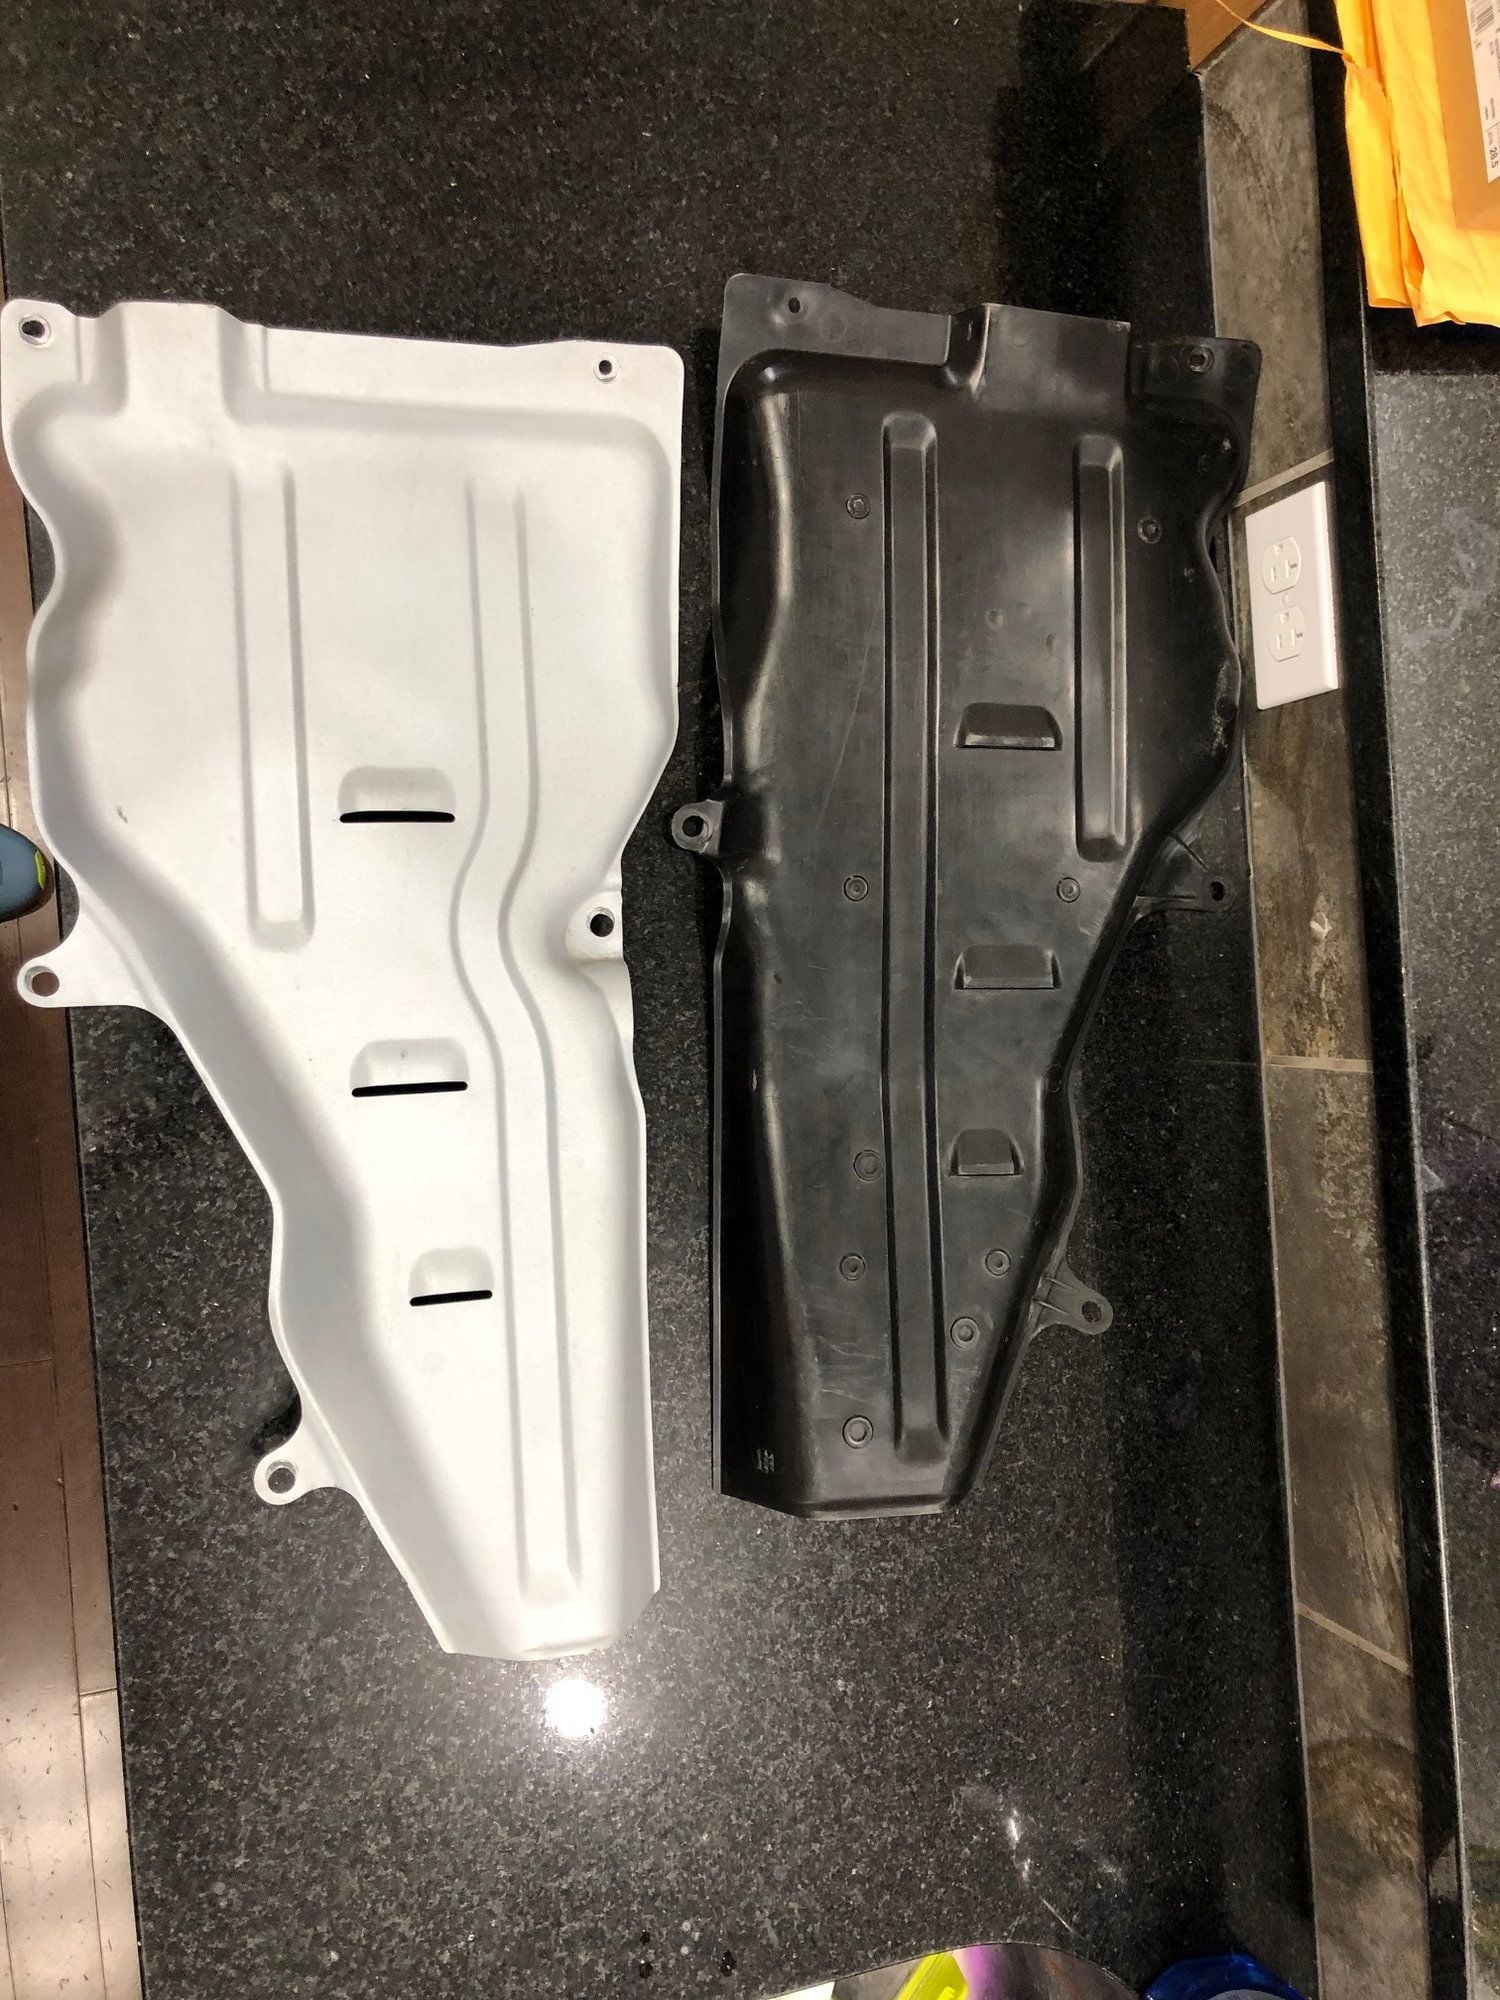 Miscellaneous - WTB rear plastic undertray - Used - 1993 to 2001 Mazda RX-7 - Chicago, IL 60647, United States